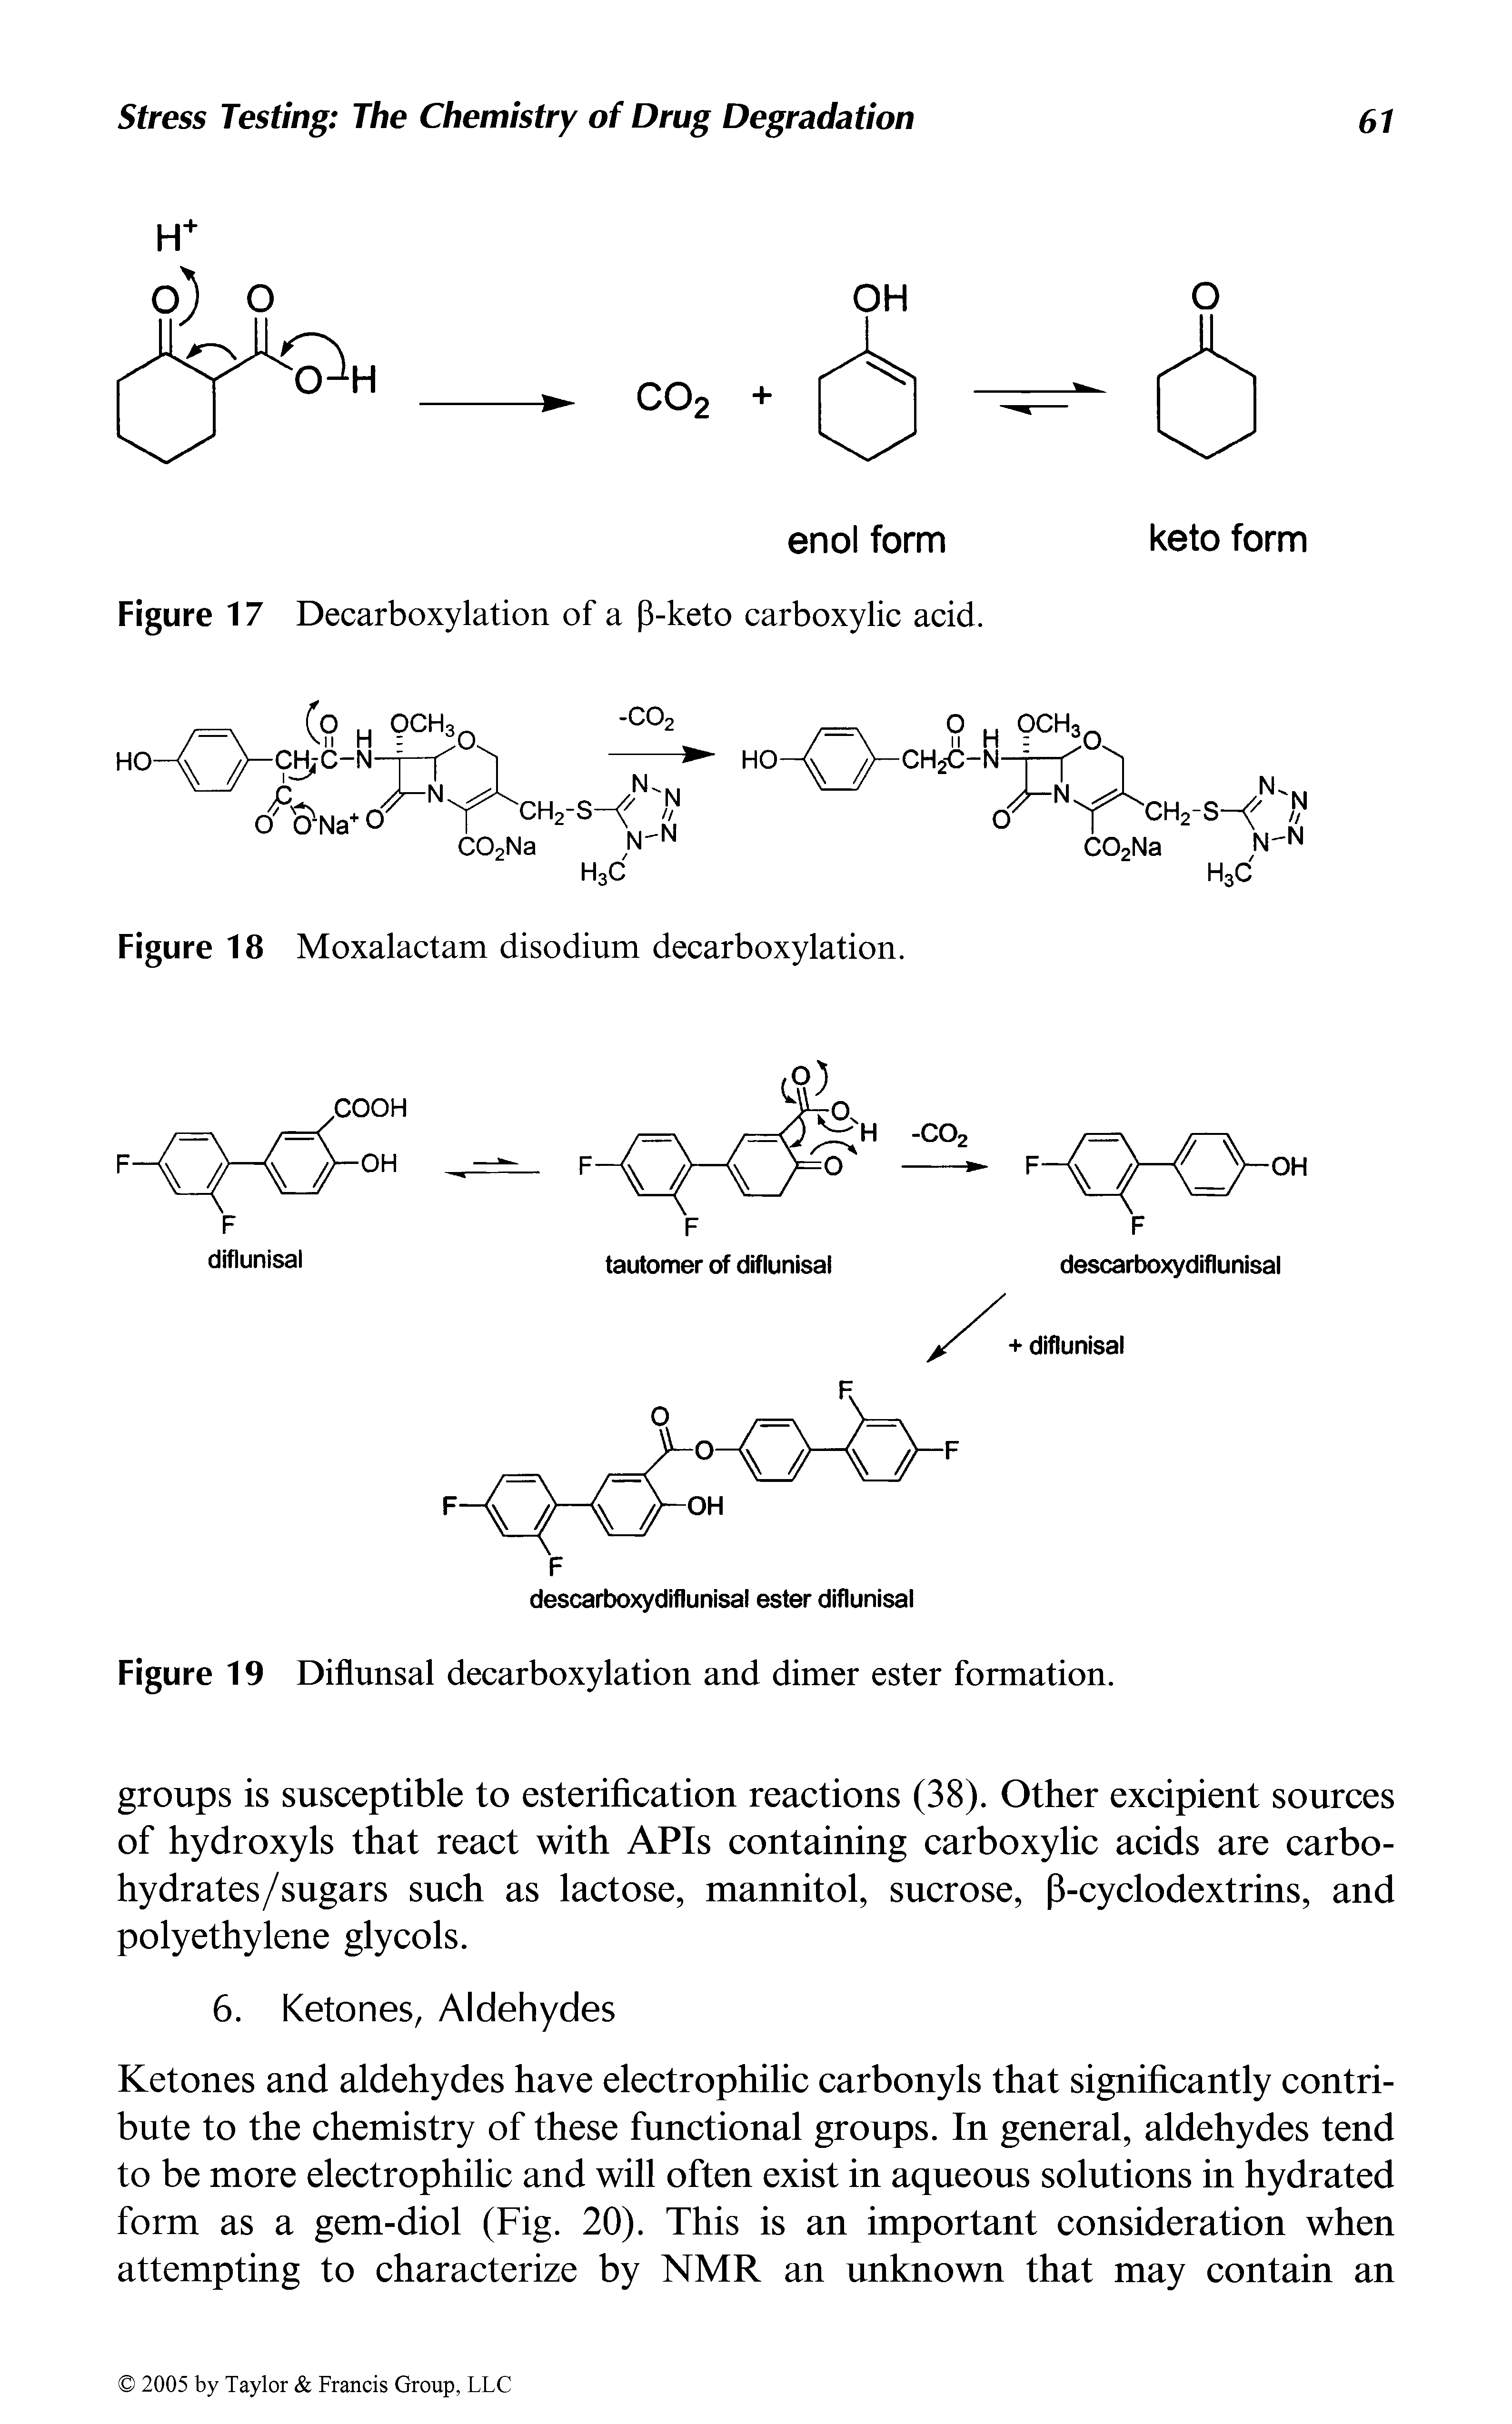 Figure 19 Diflunsal decarboxylation and dimer ester formation.